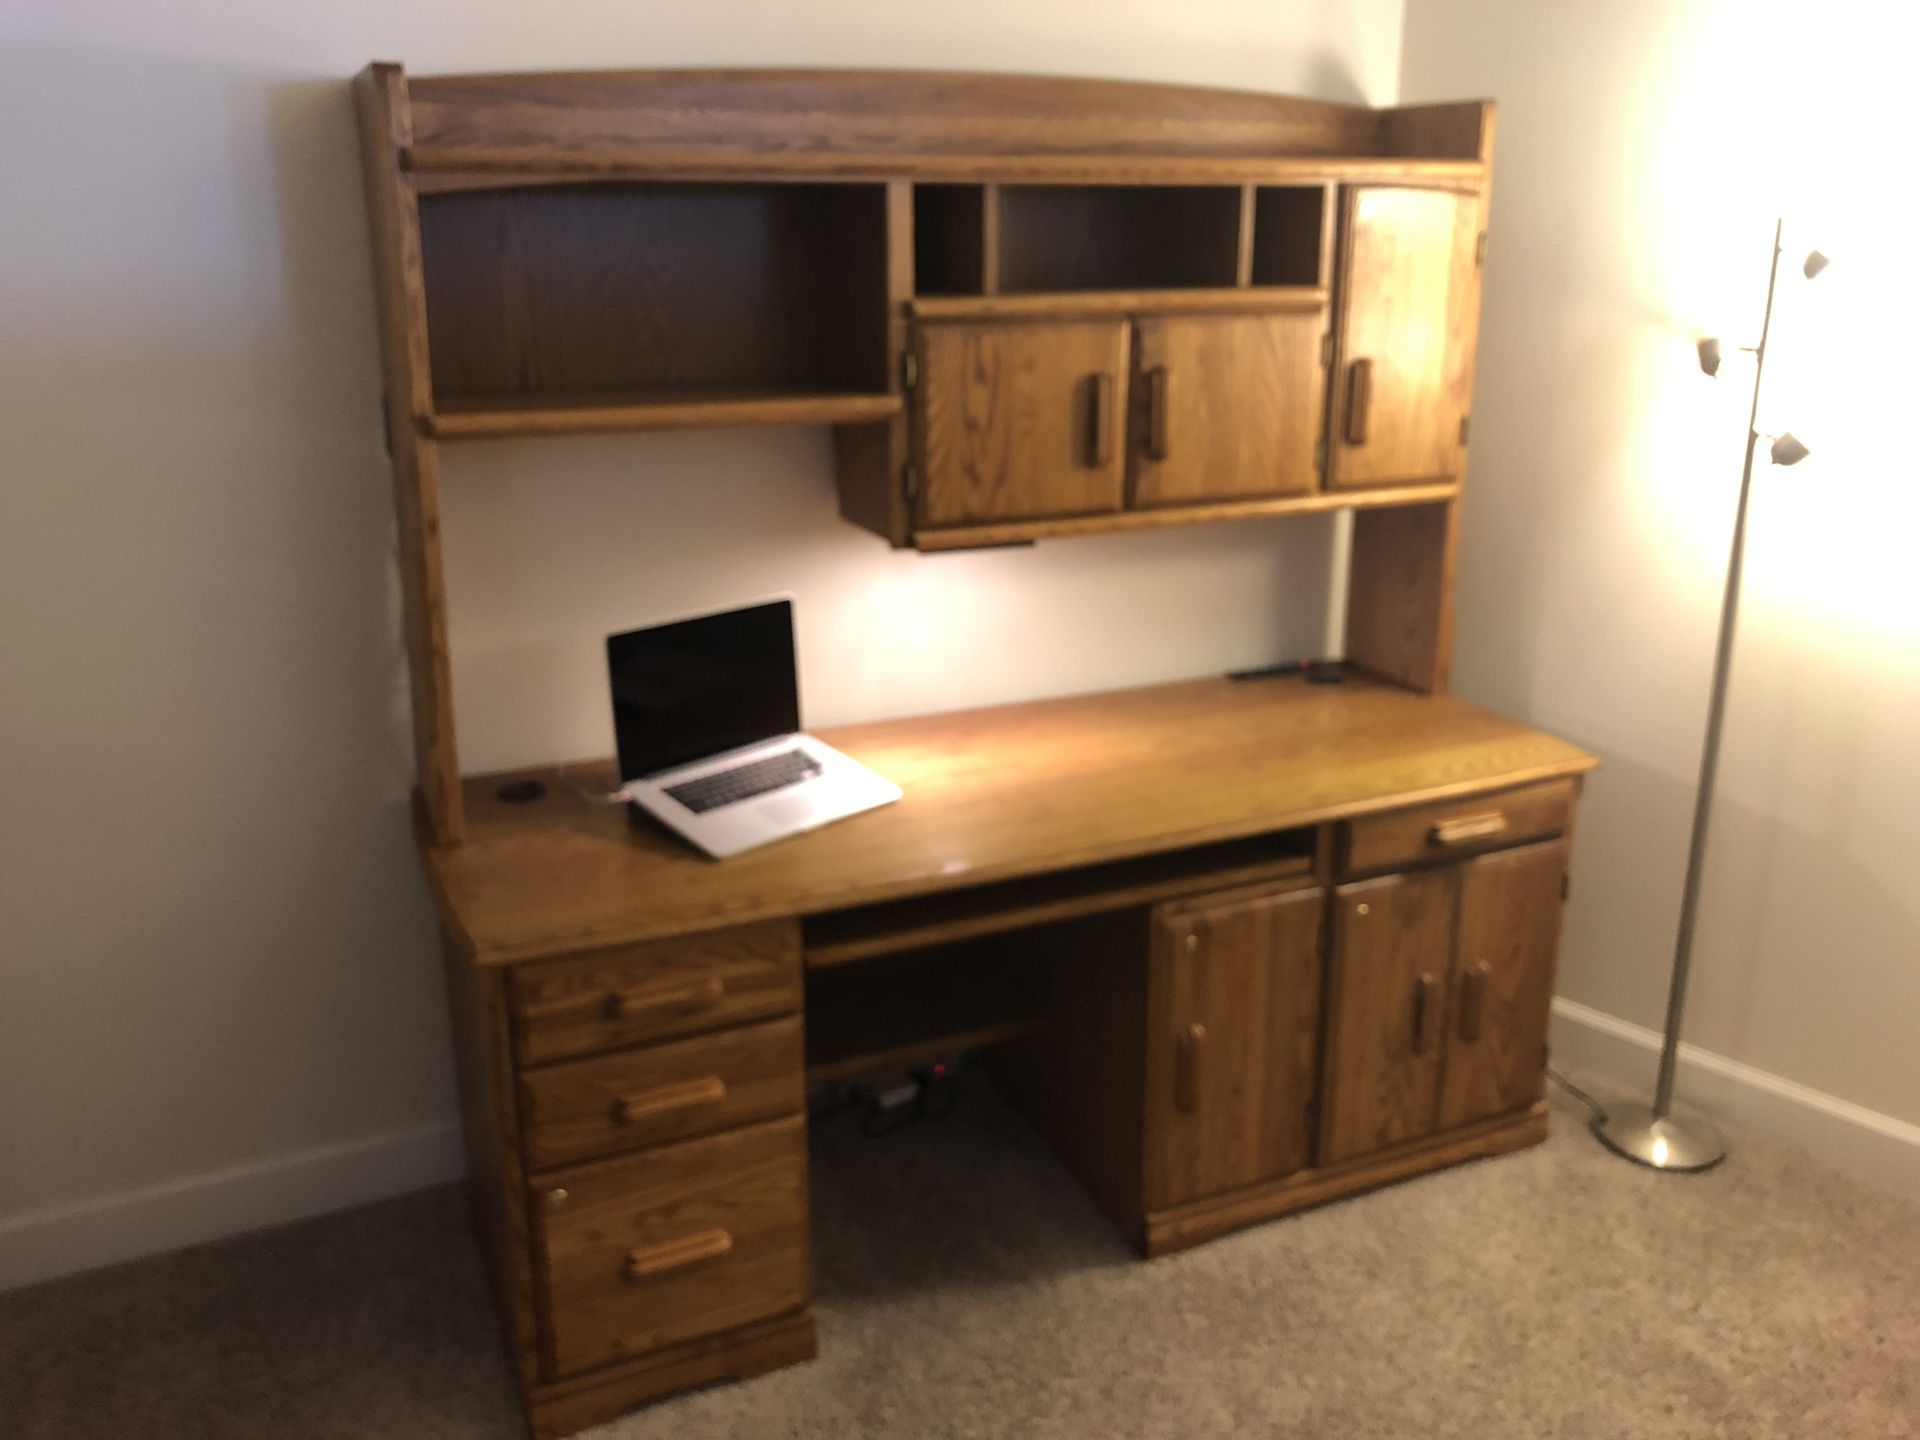 Computer desk with hutch